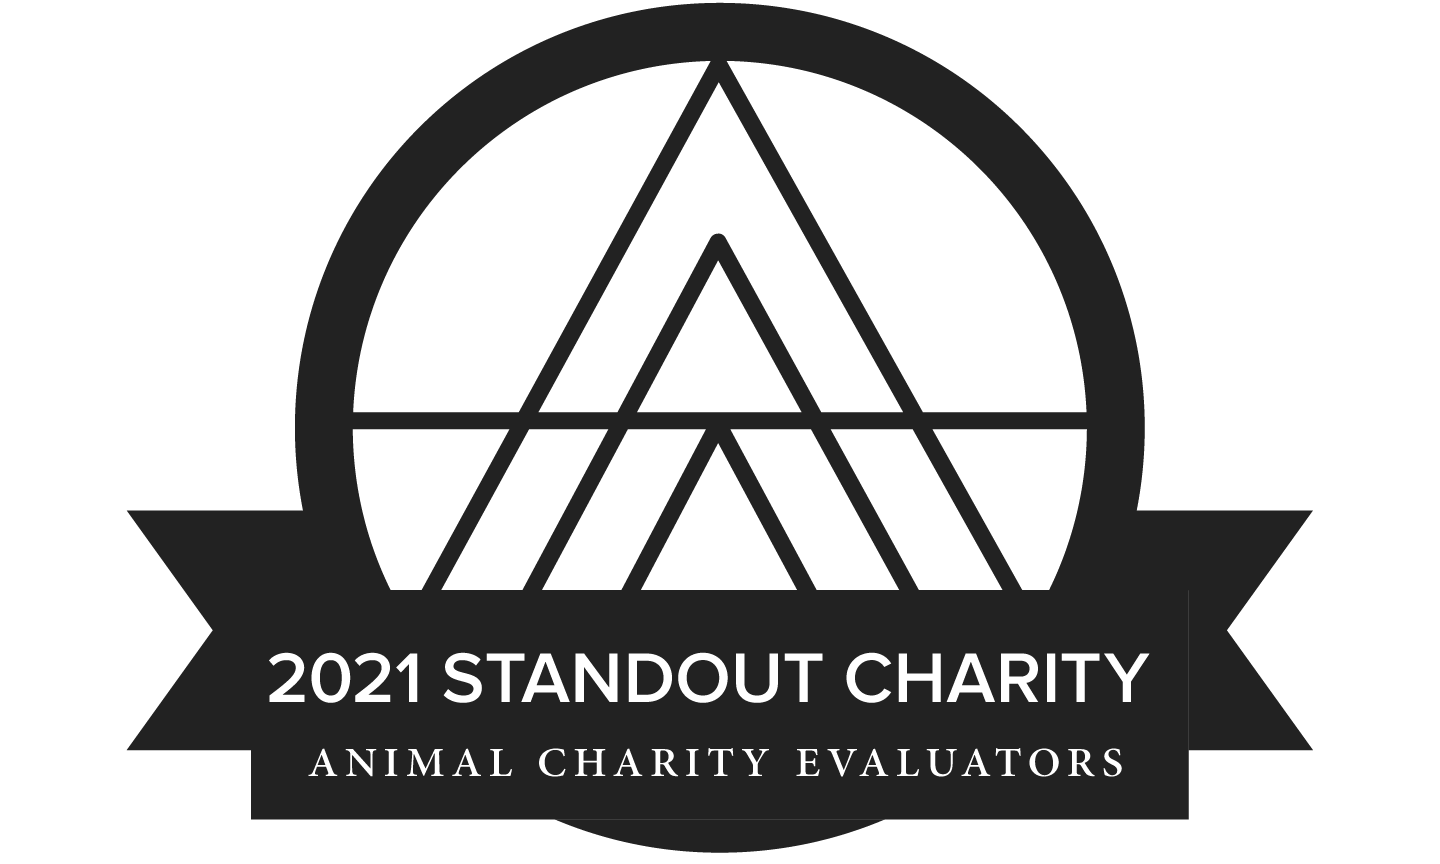 New Harvest is a 2021 standout charity according to Animal Charity Evaluators